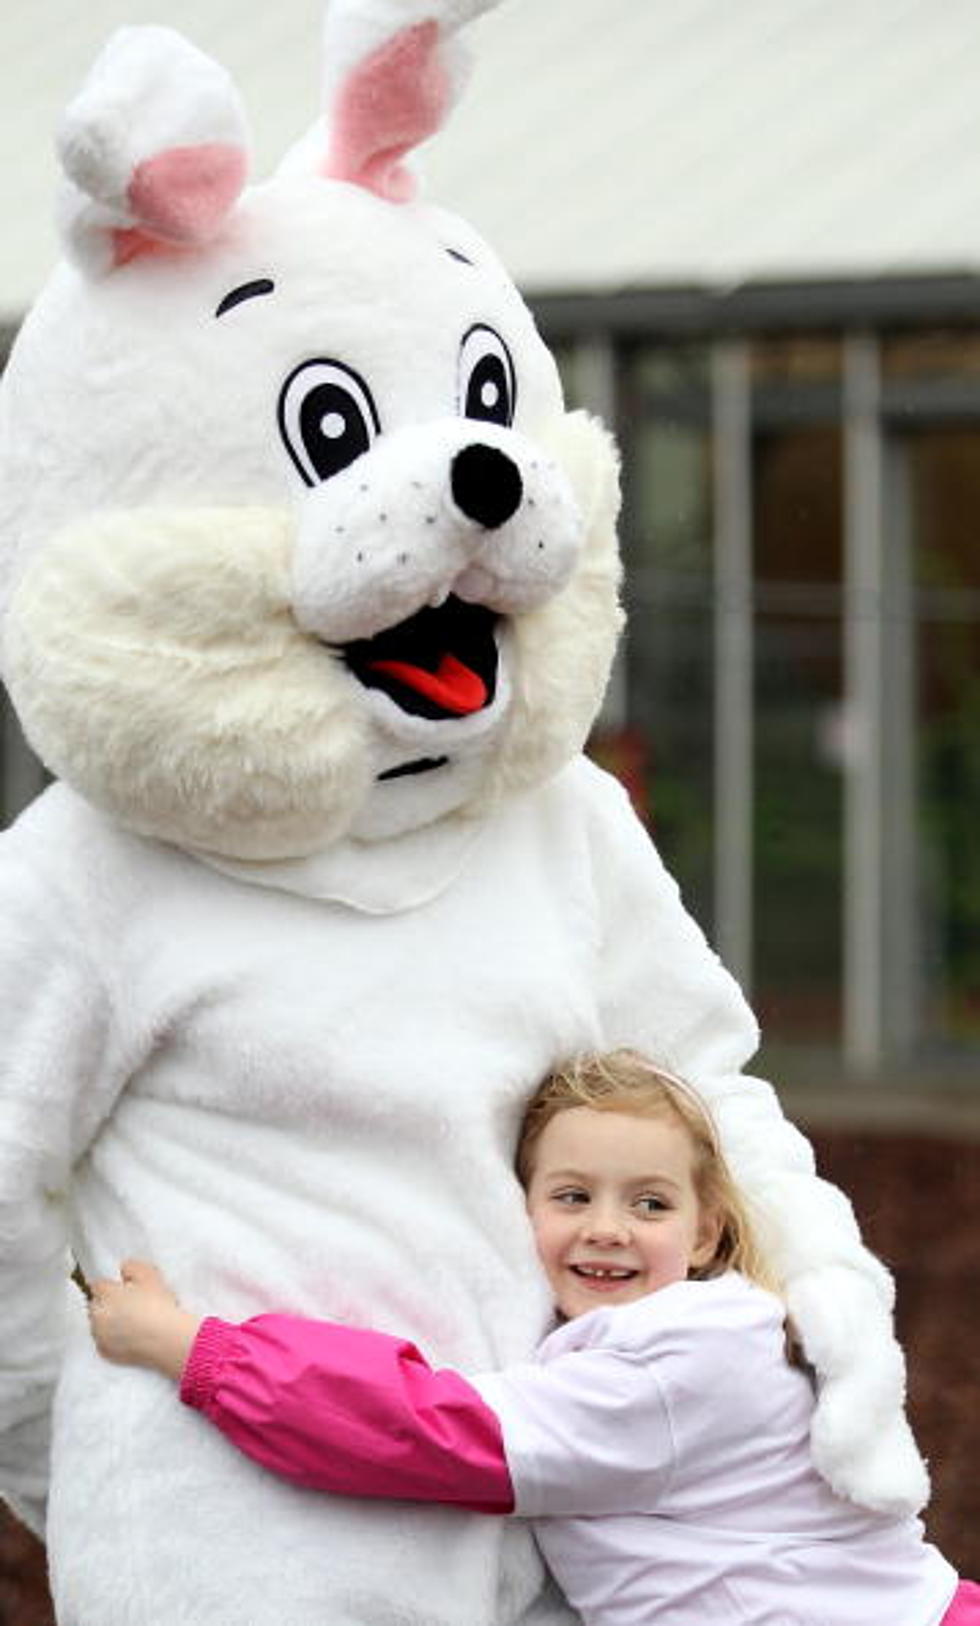 Why Do We Associate Easter With A Bunny?